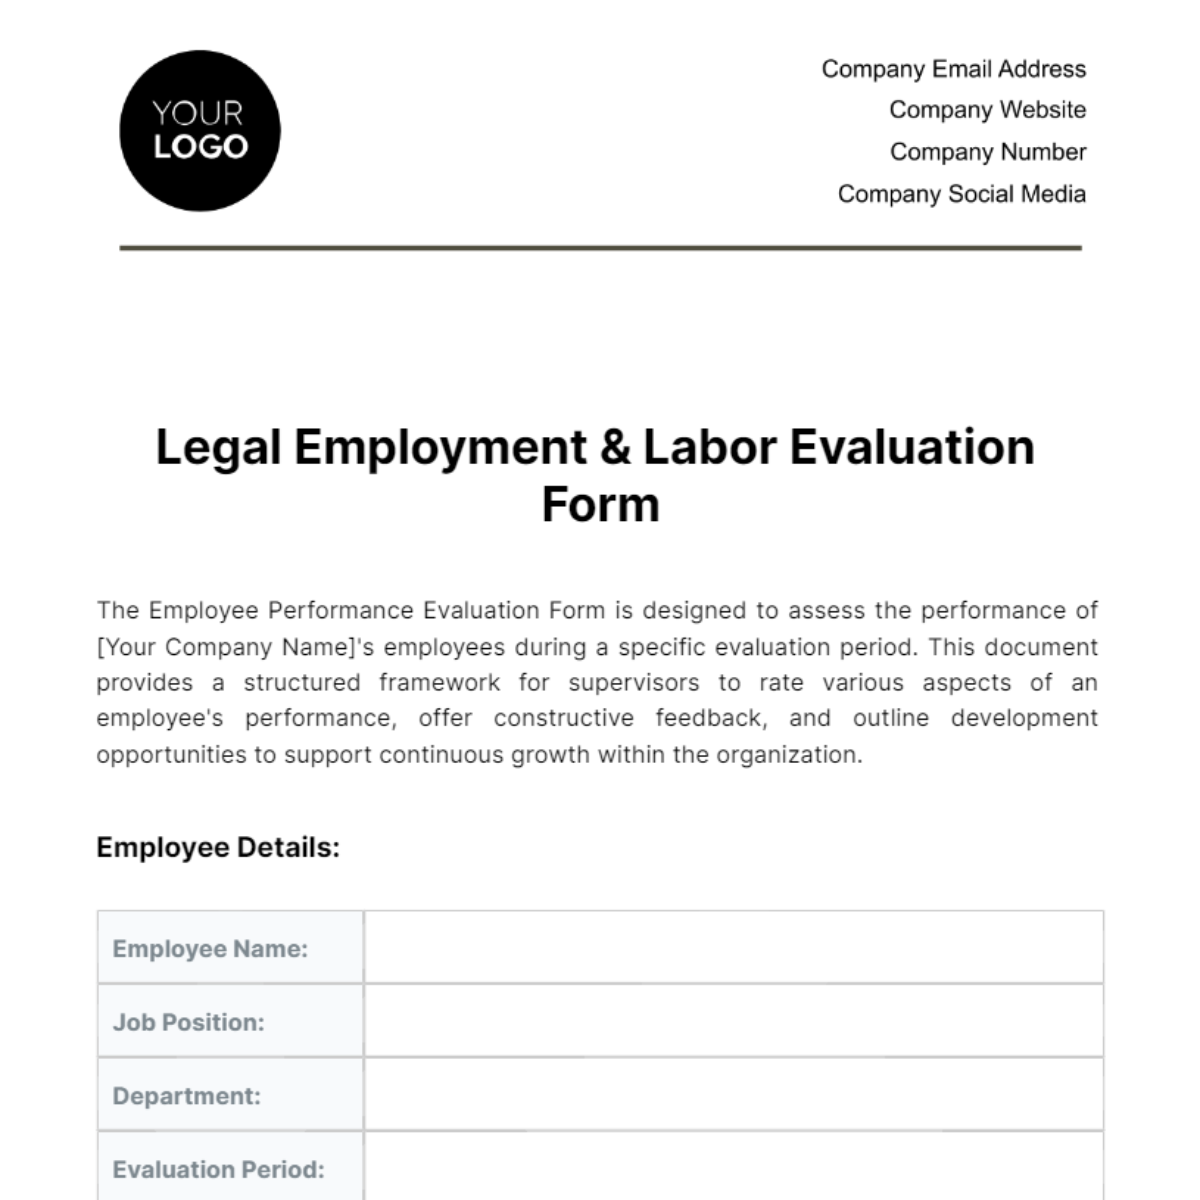 Free Legal Employment & Labor Evaluation Form Template